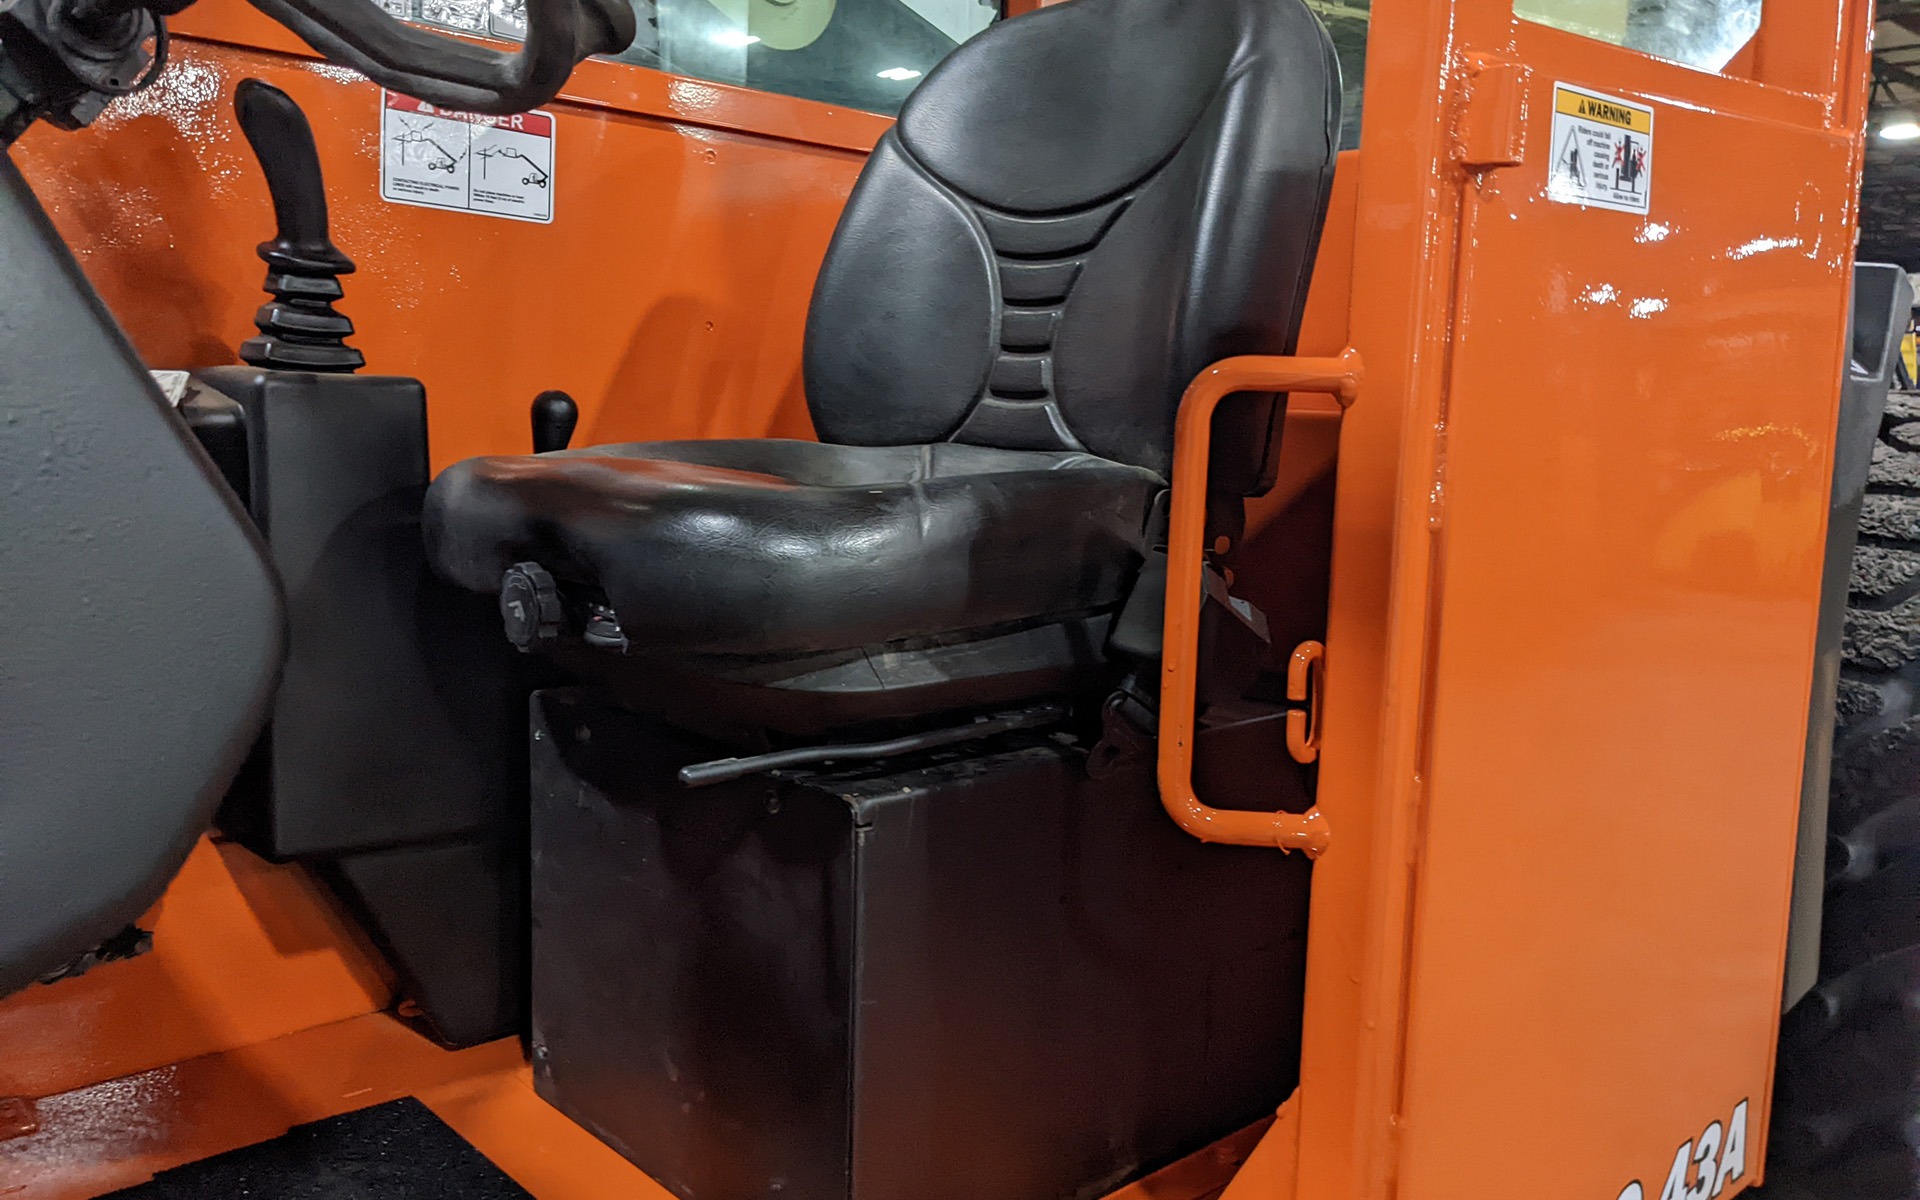 Used 2014 JLG G9-43A  | Cary, IL